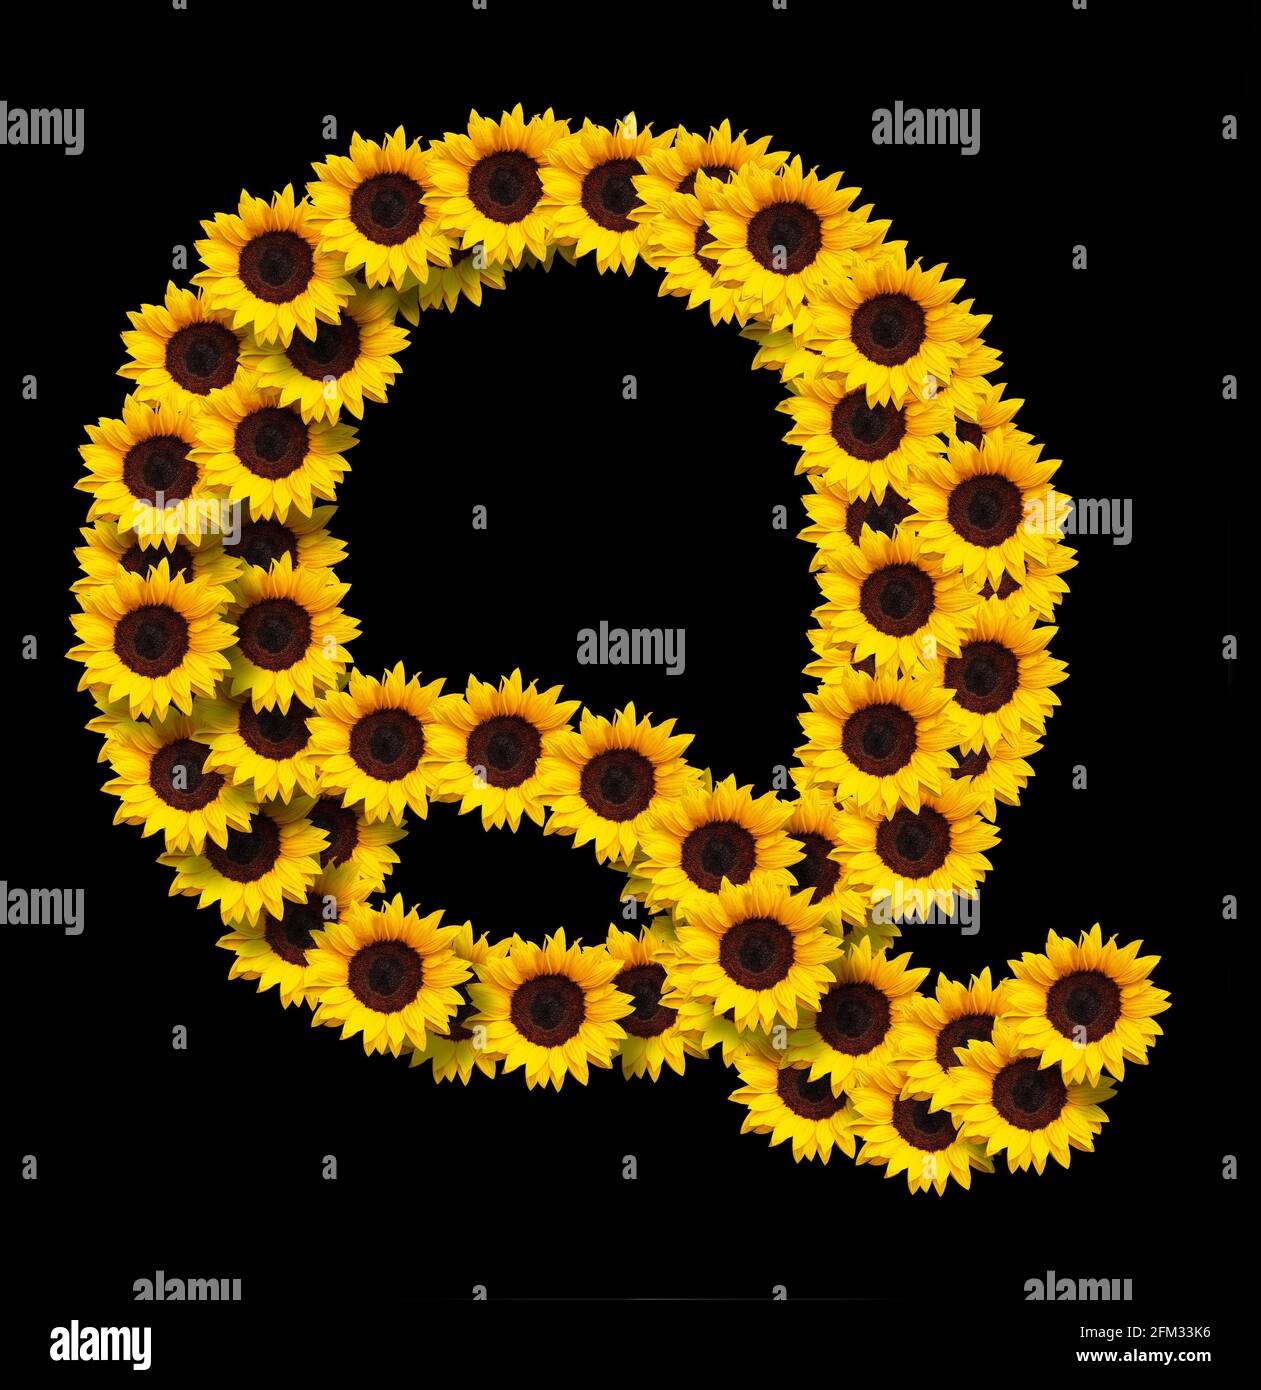 Capital letter Q made of yellow sunflowers flowers isolated on black background. Design element for love concepts designs. Ideal for mothers day and s Stock Photo